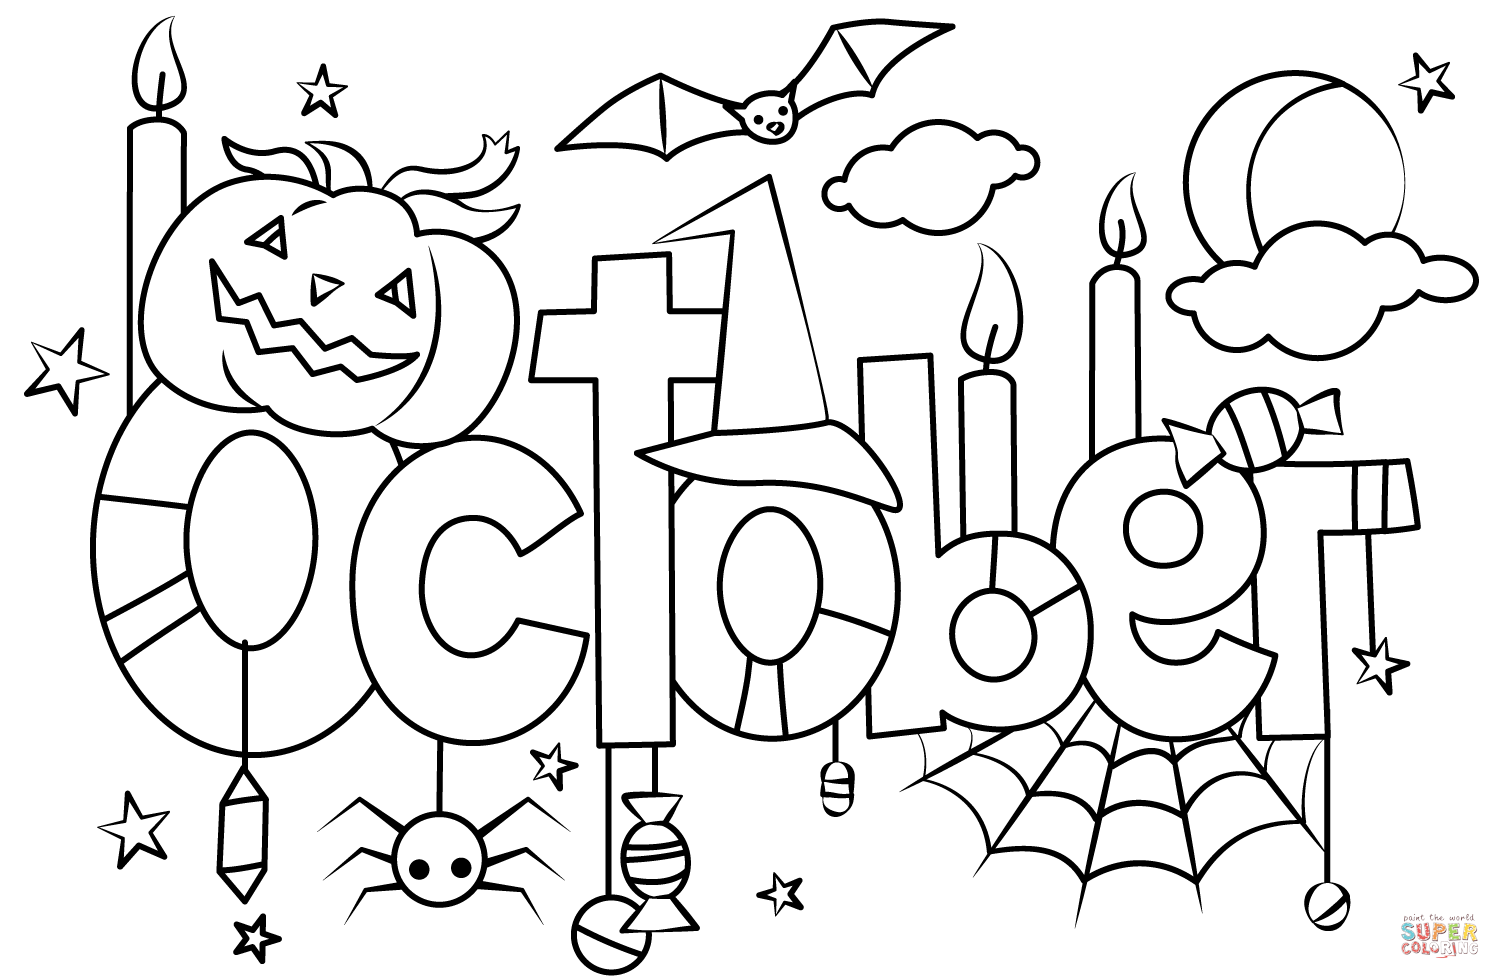 october-coloring-pages-fall-coloring-pages-coloring-pages-for-kids